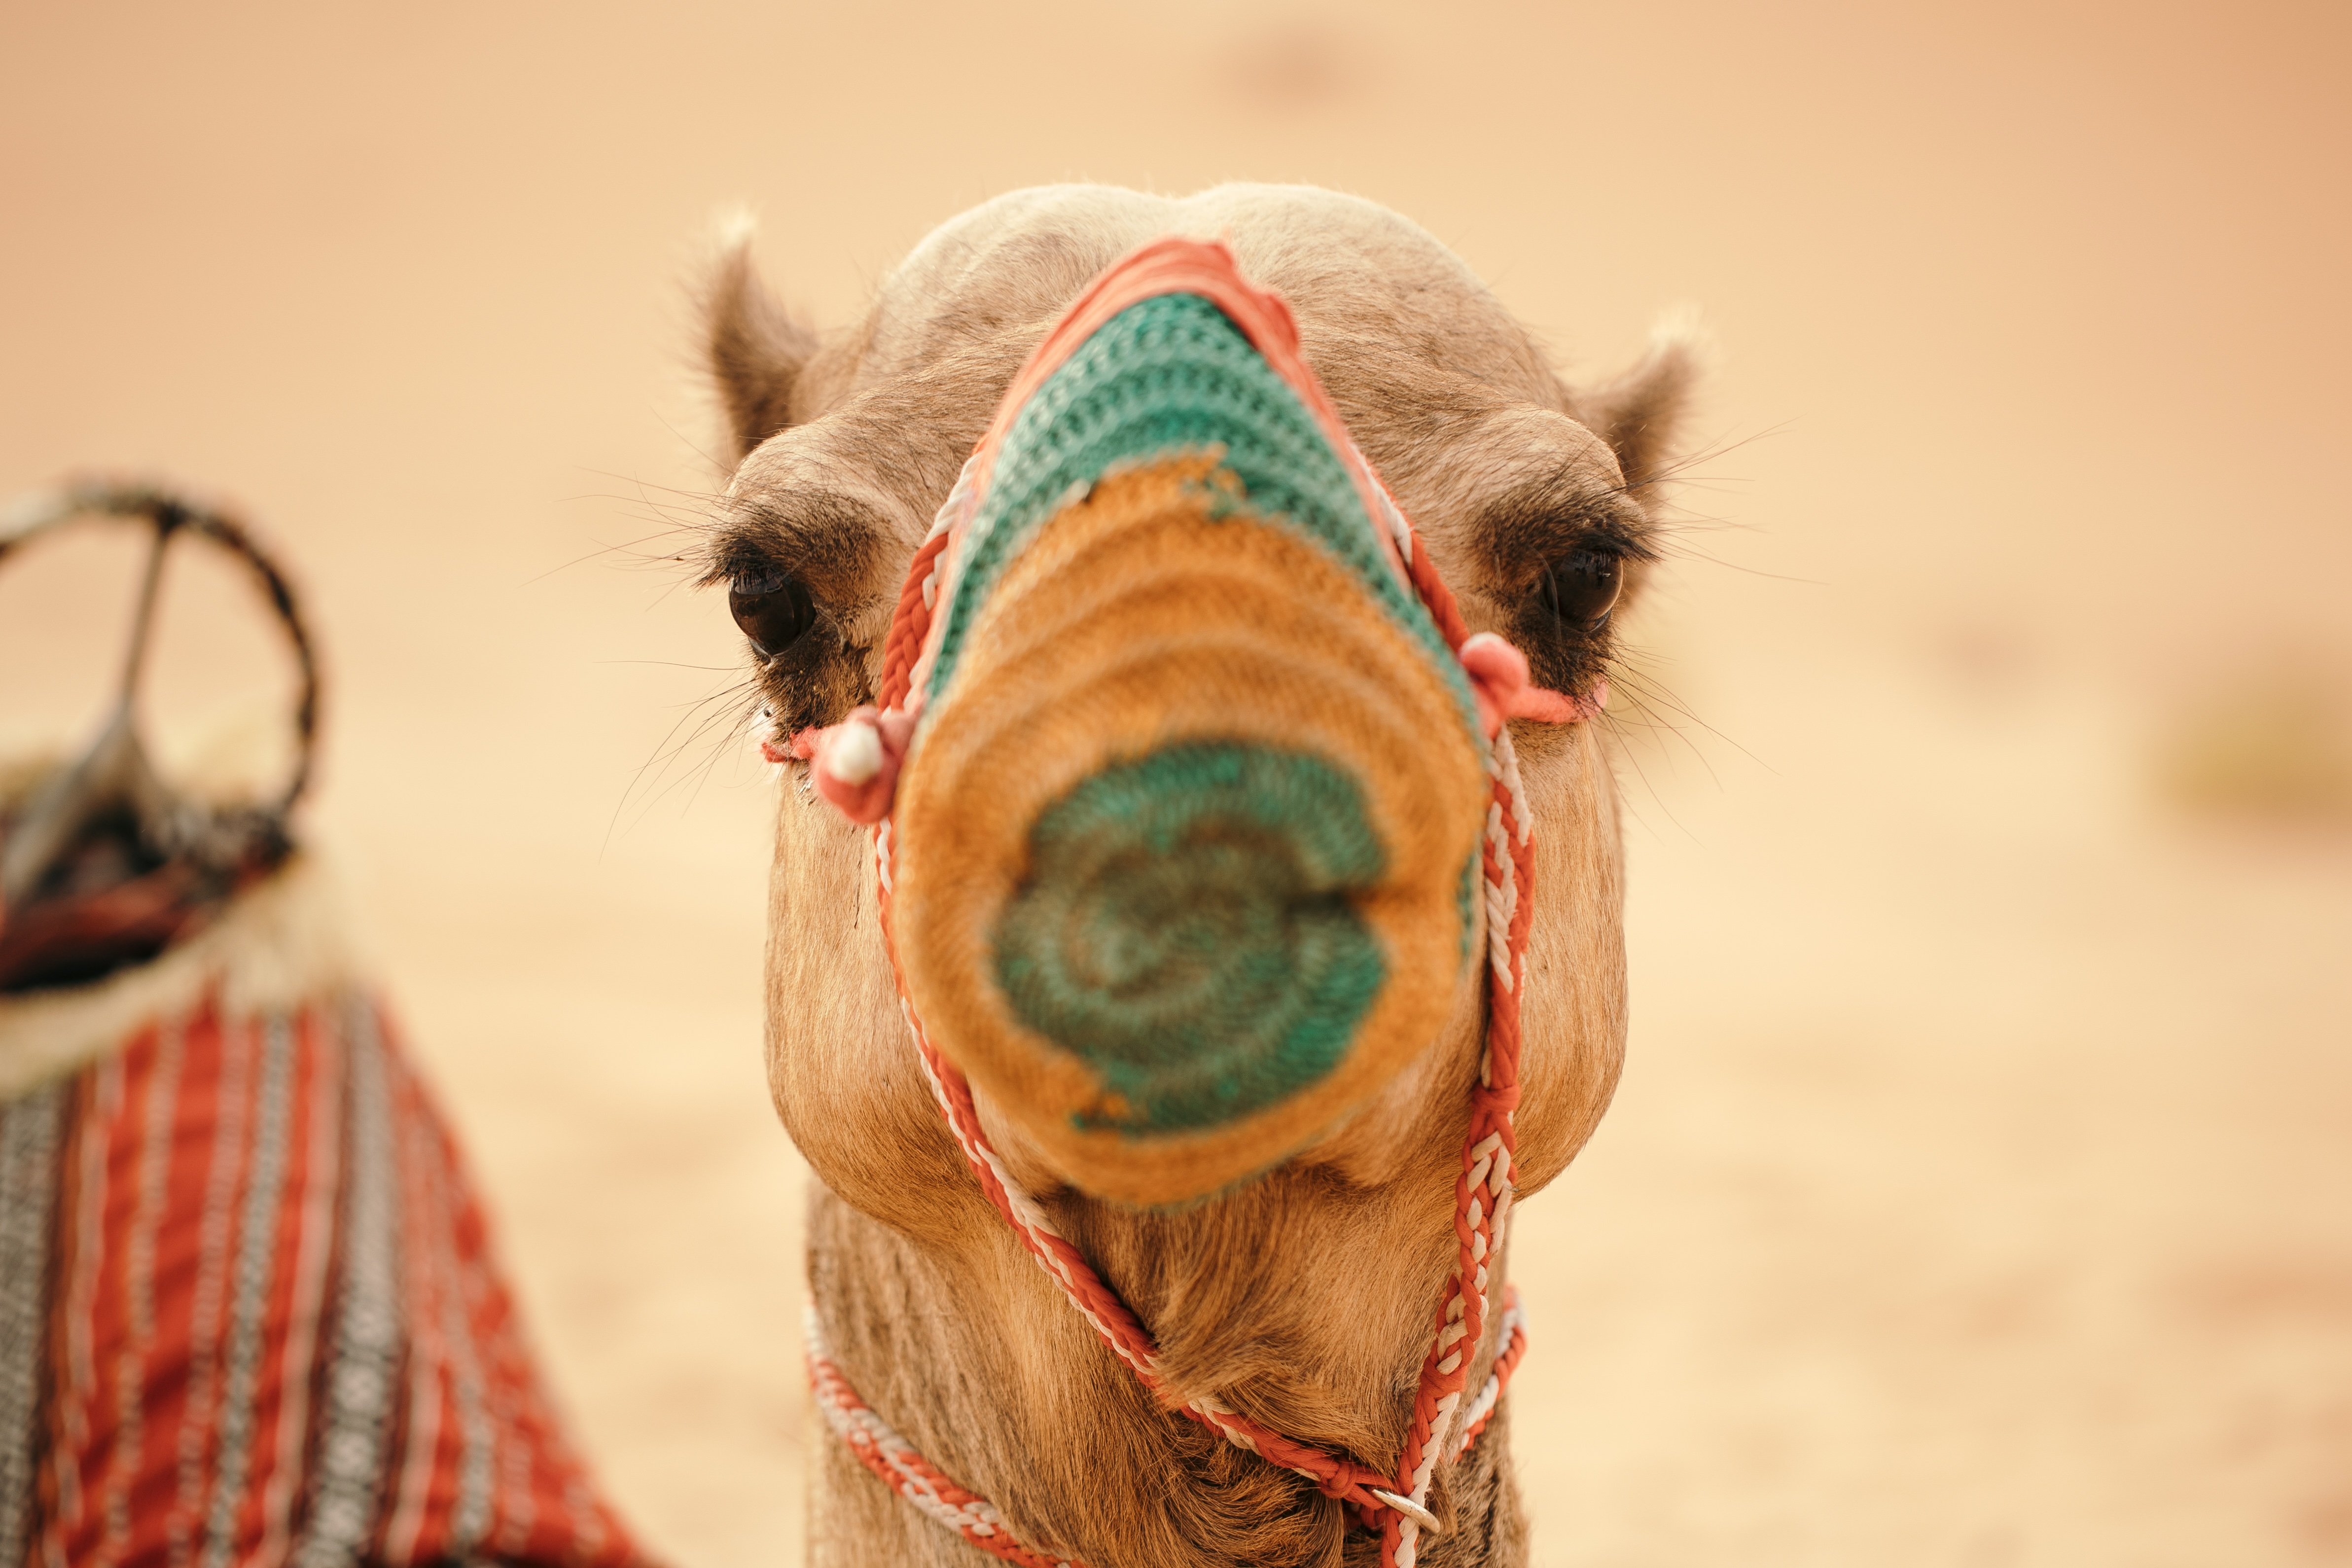 The Empty Quarter is full of memorable experiences